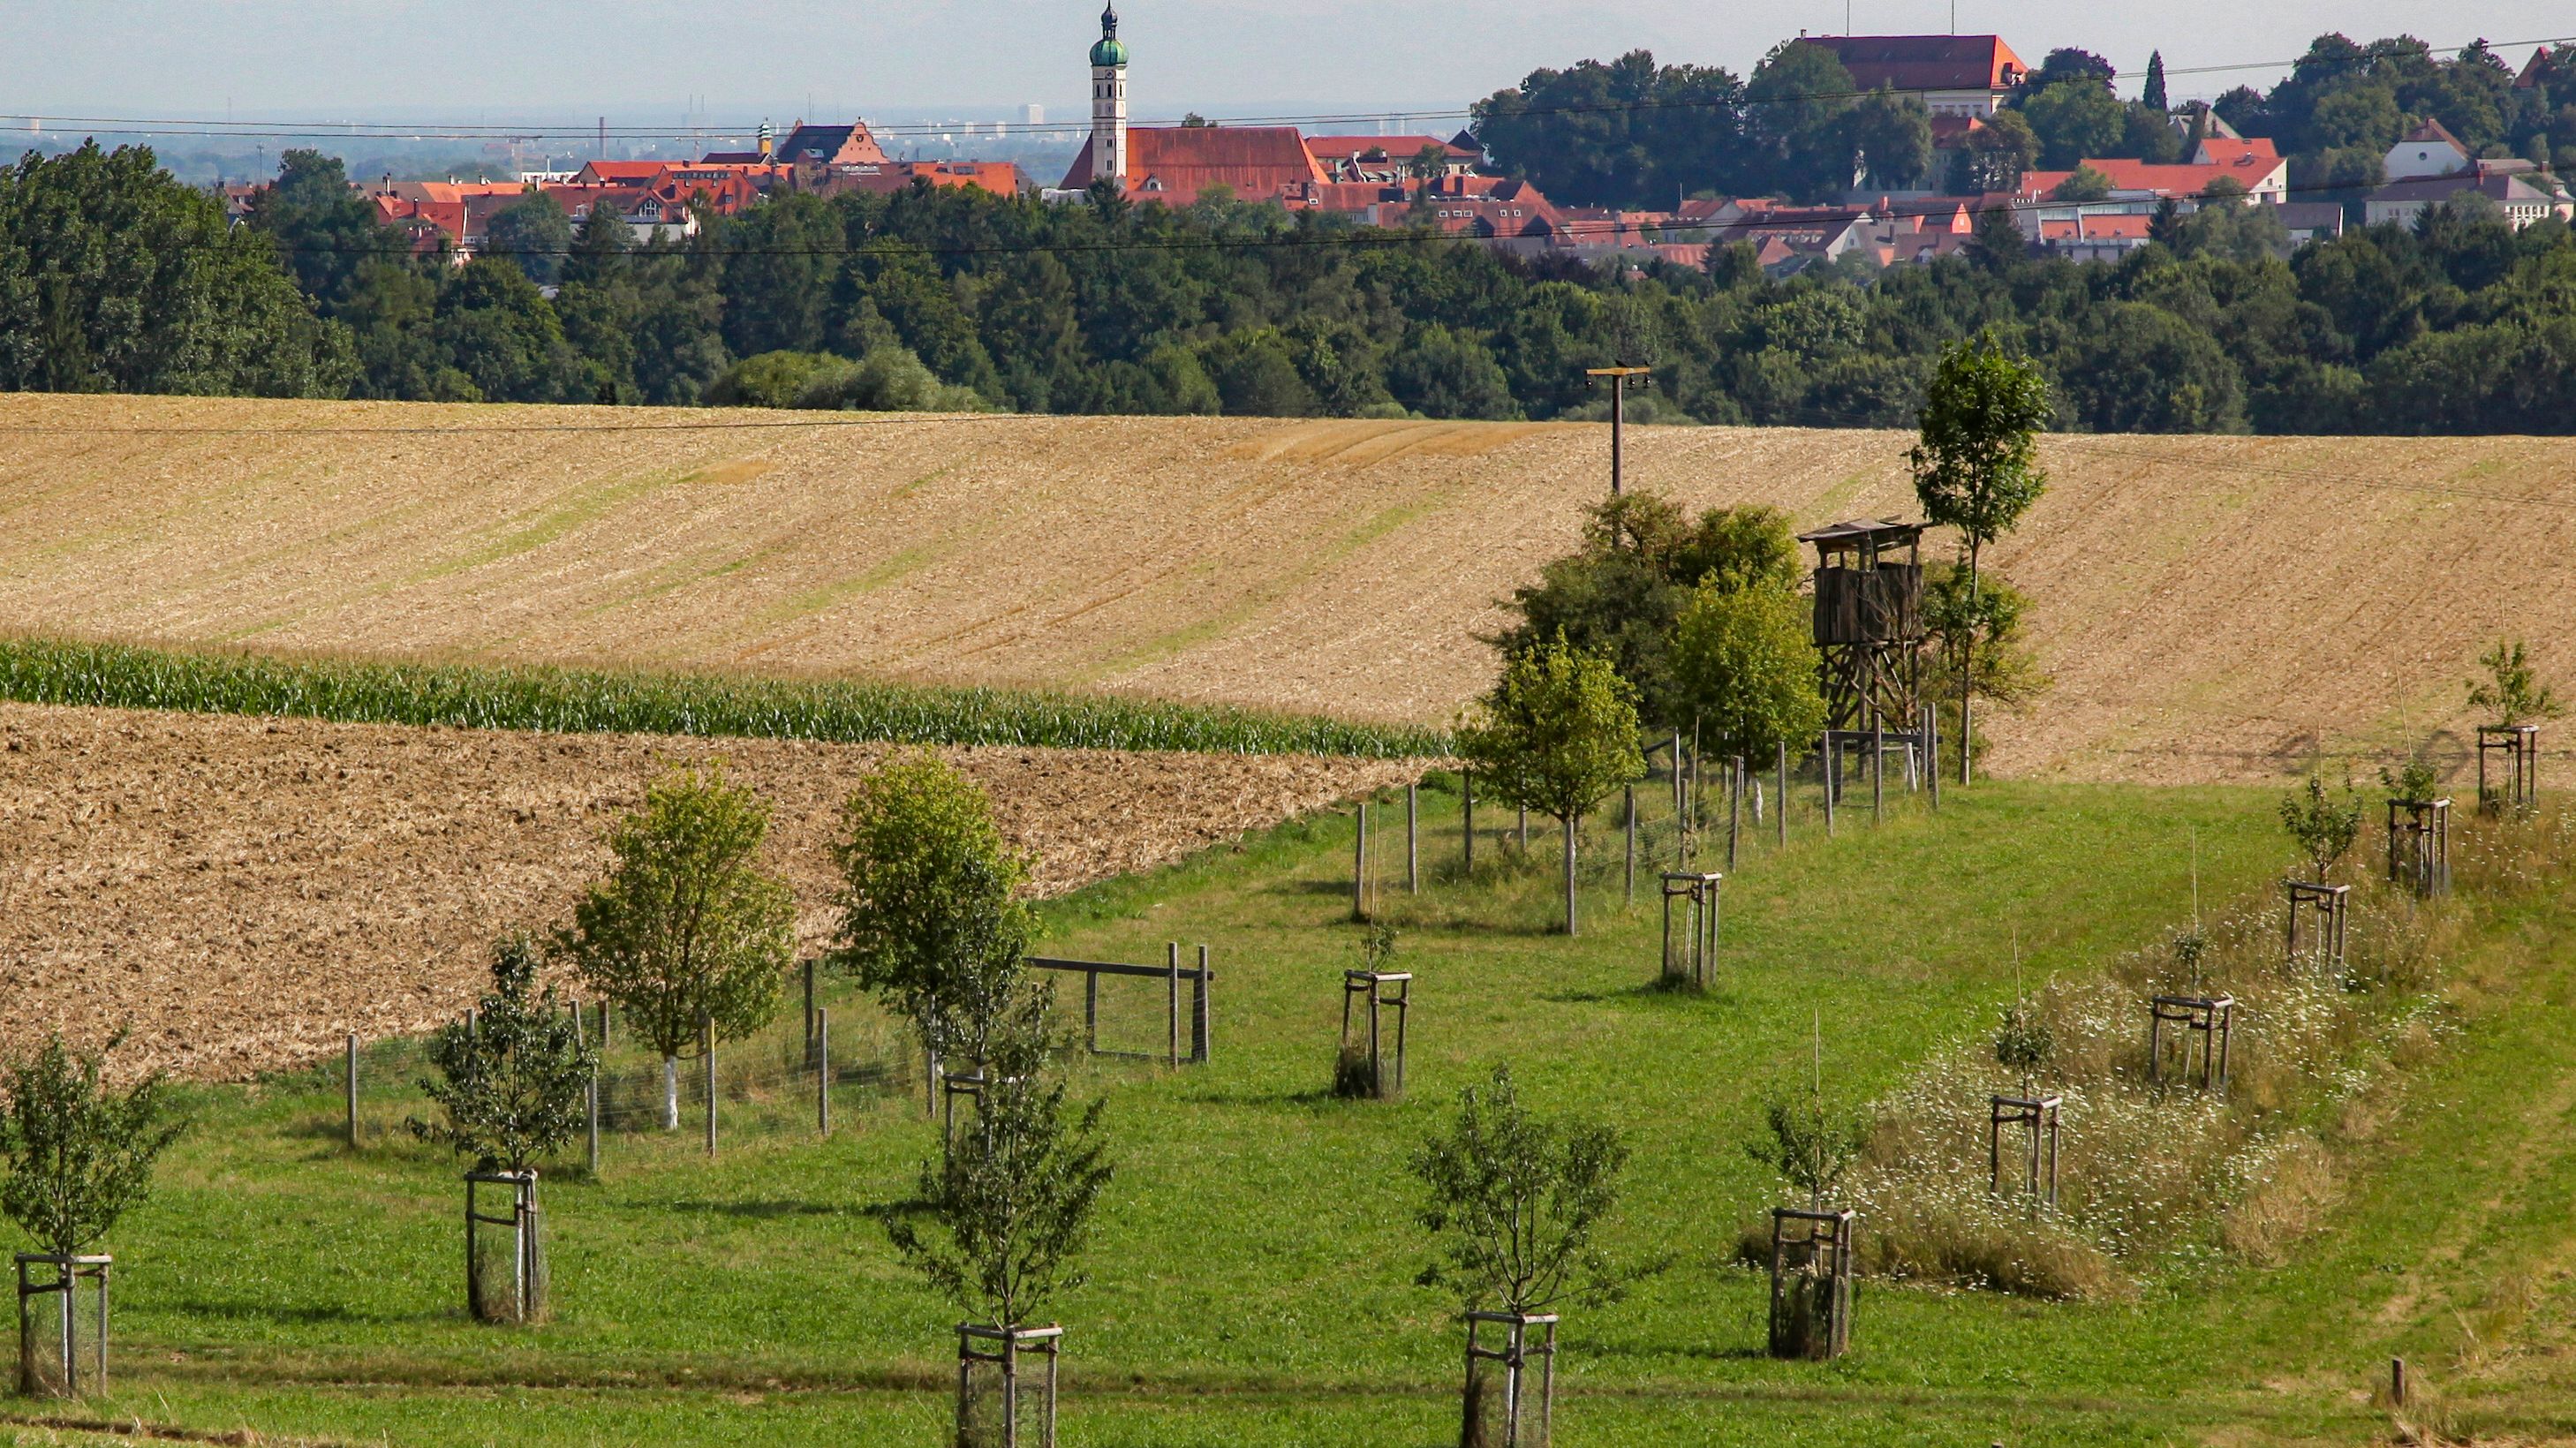 Photo of old town dachau in the distance with orchards and fields in the fore ground. Photo: City of Dachau